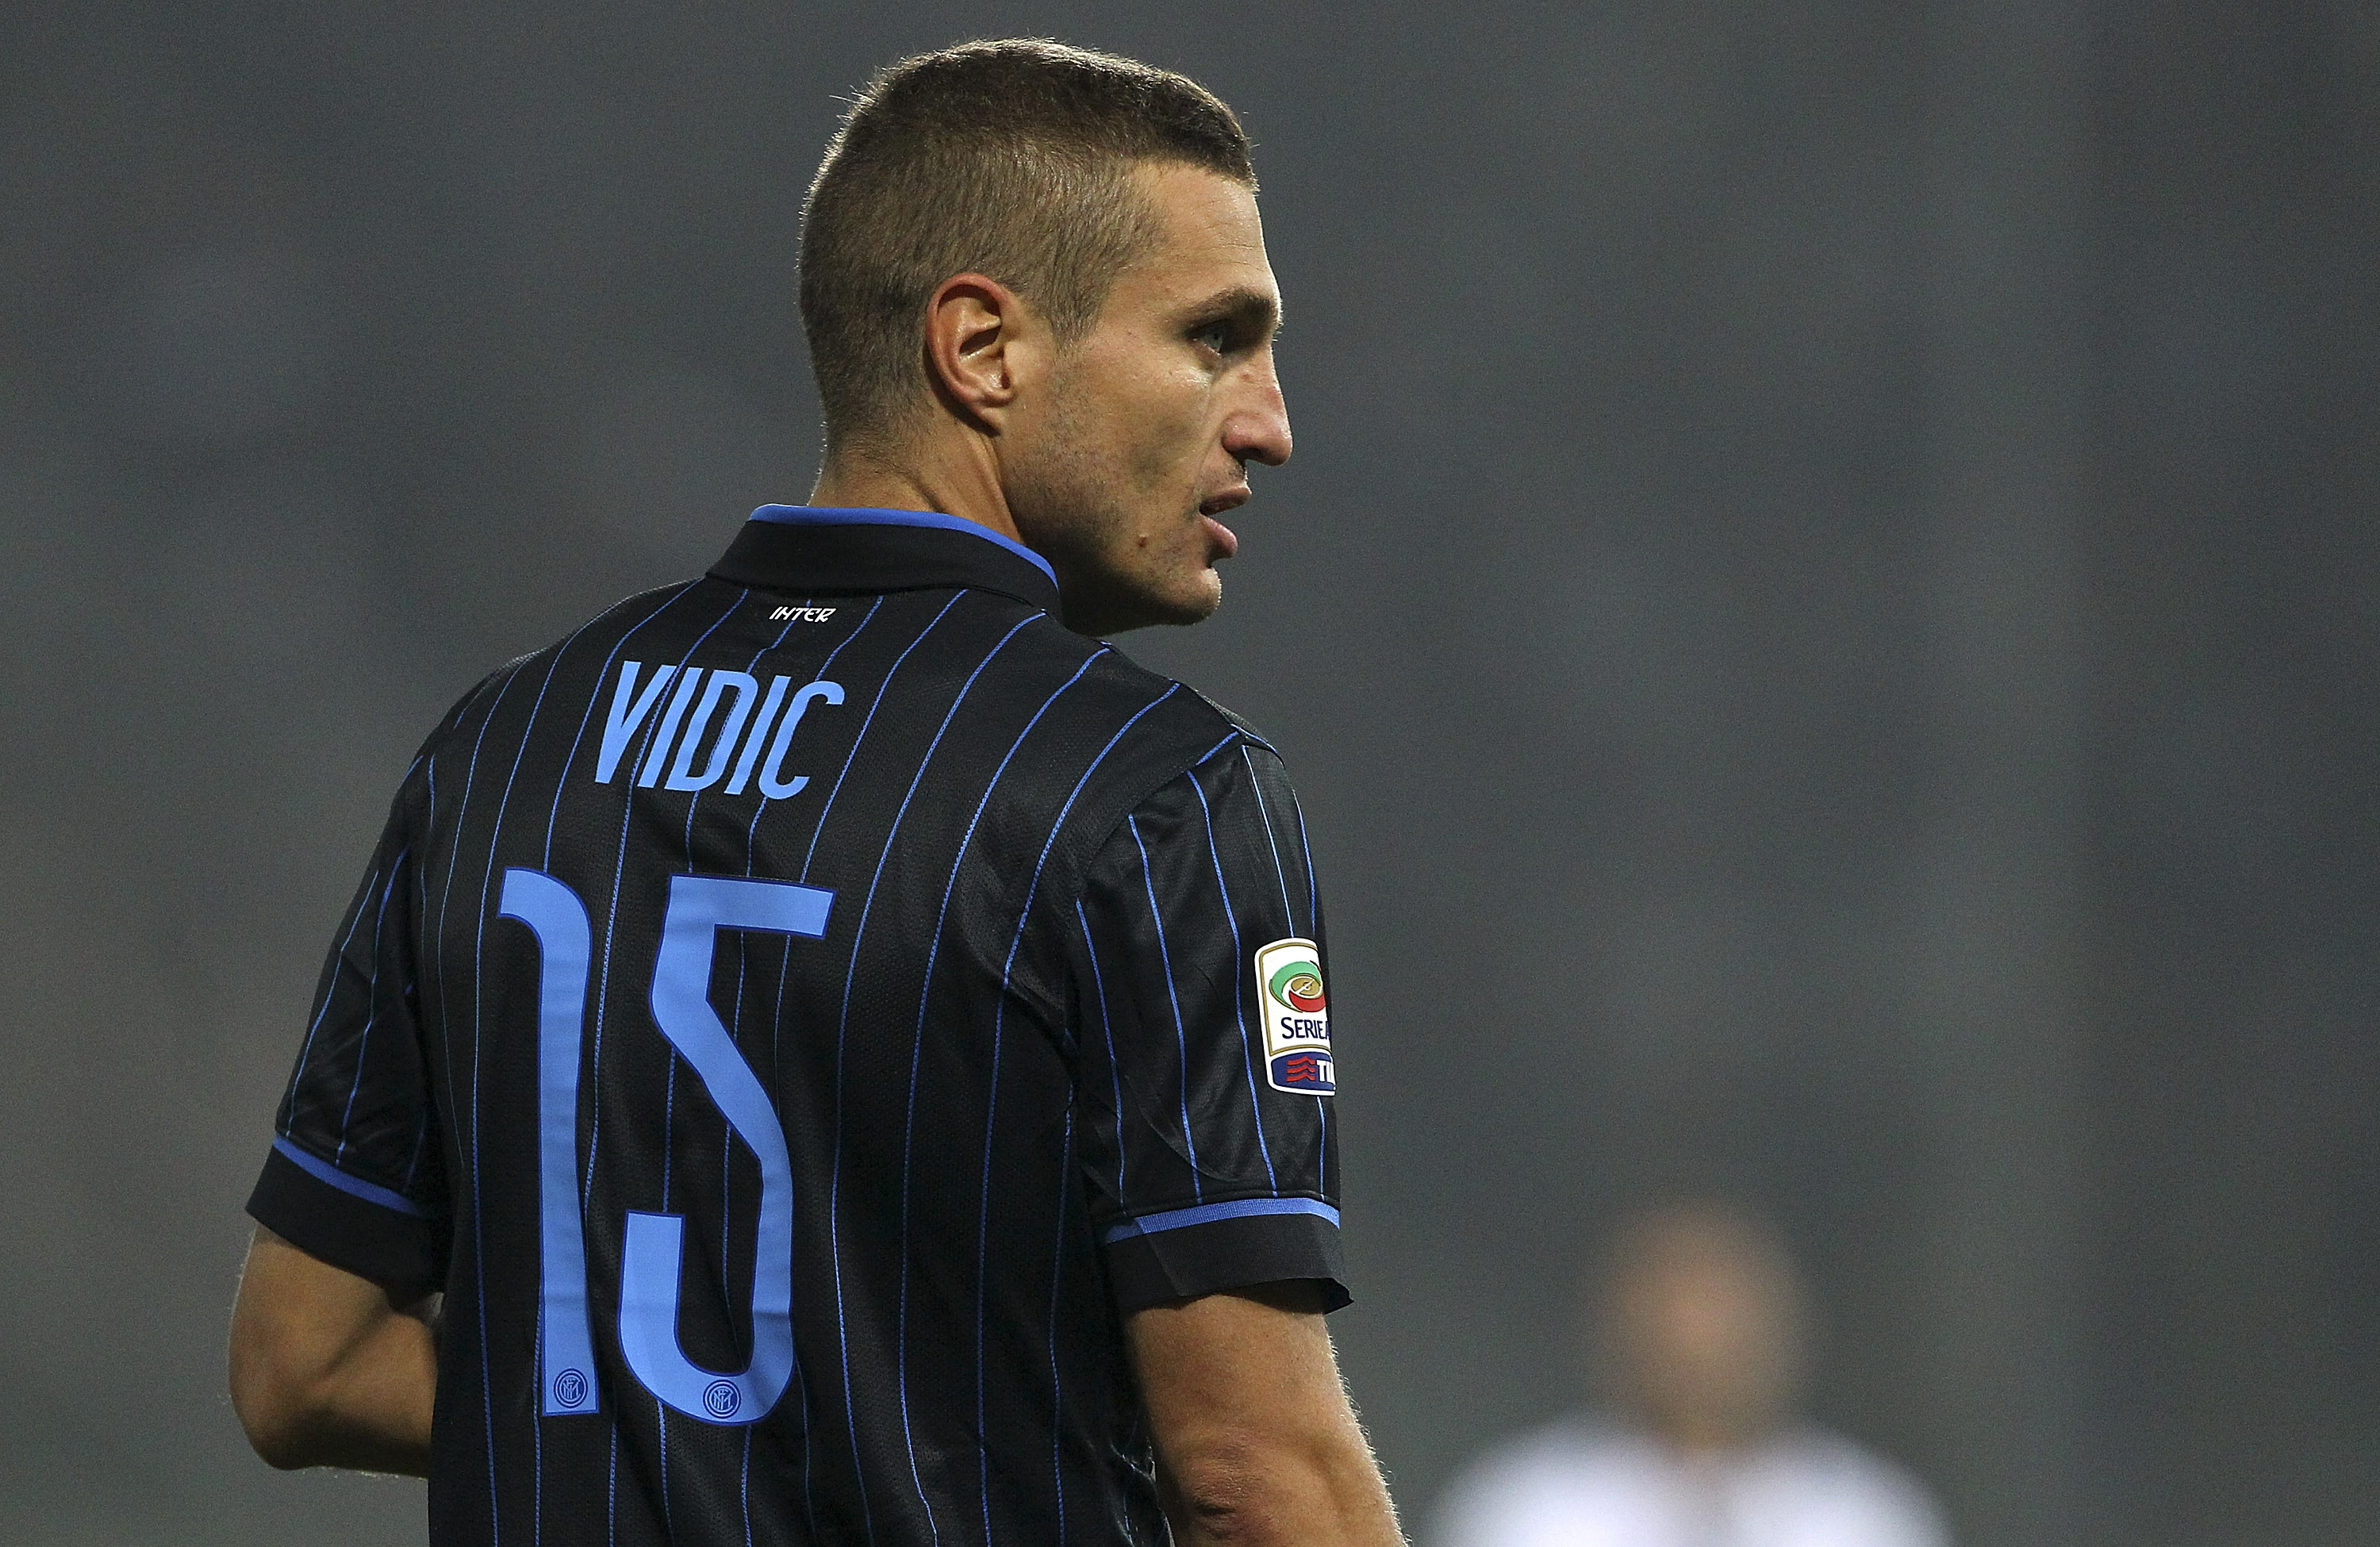 Vidic: “I Hope Inter Make Second Round Of Champions League Next Year”